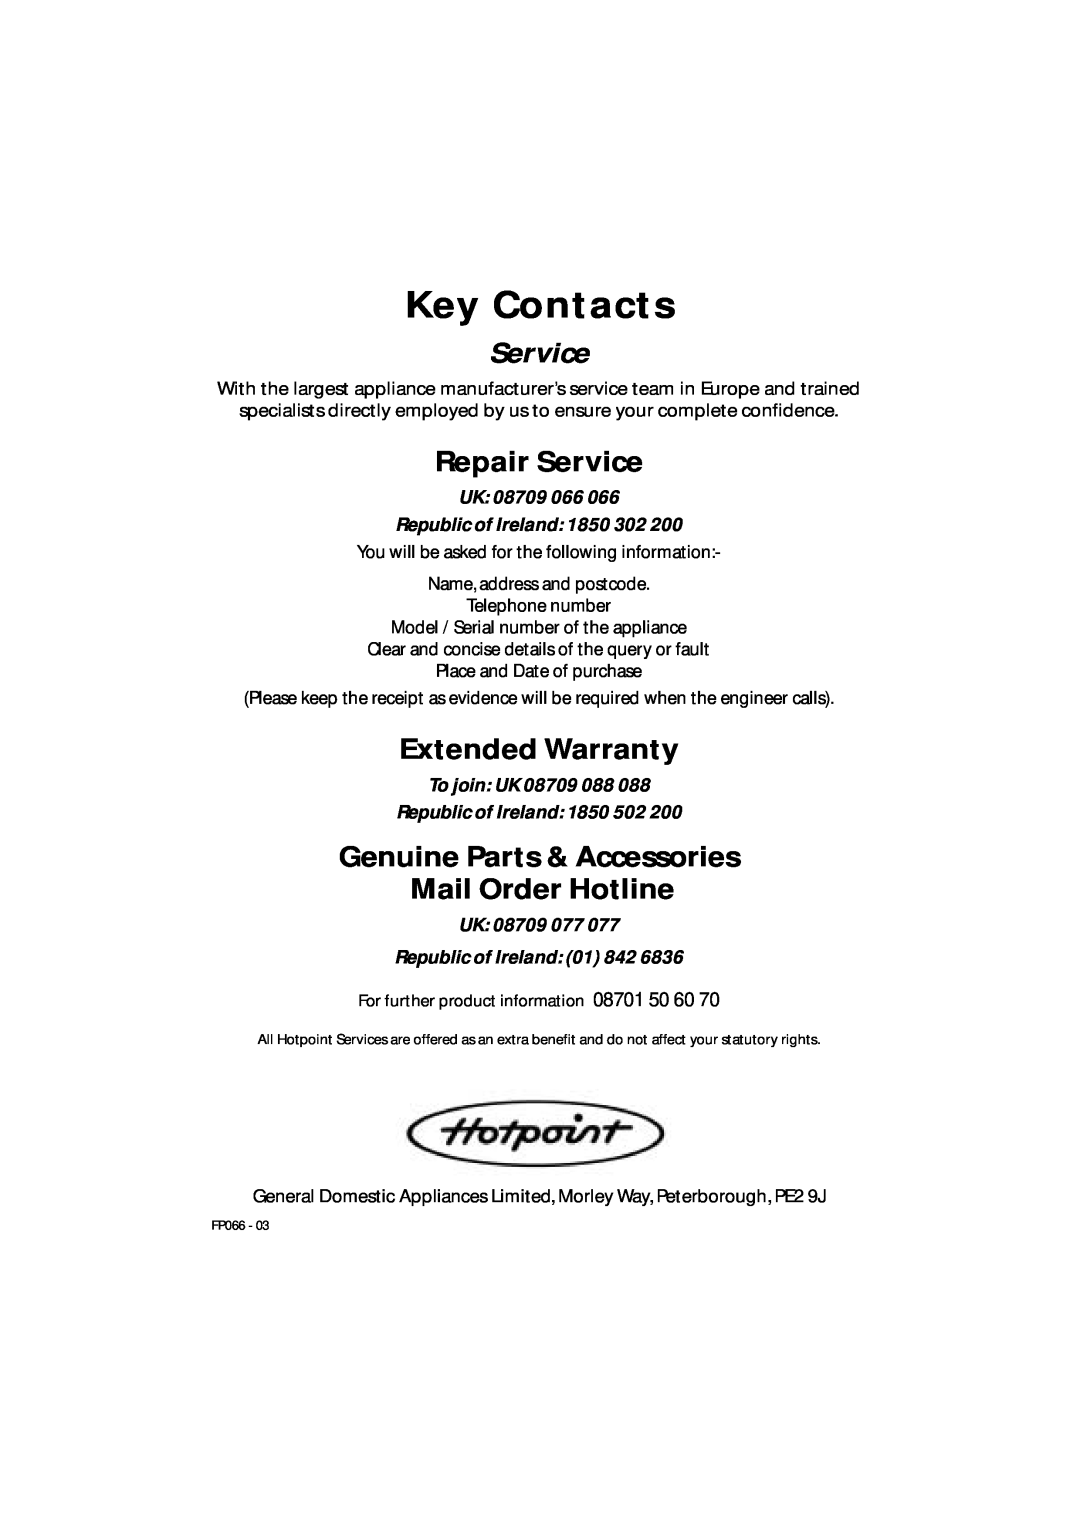 Hotpoint FZ92P manual Key Contacts, Repair Service, Extended Warranty, Genuine Parts & Accessories Mail Order Hotline 